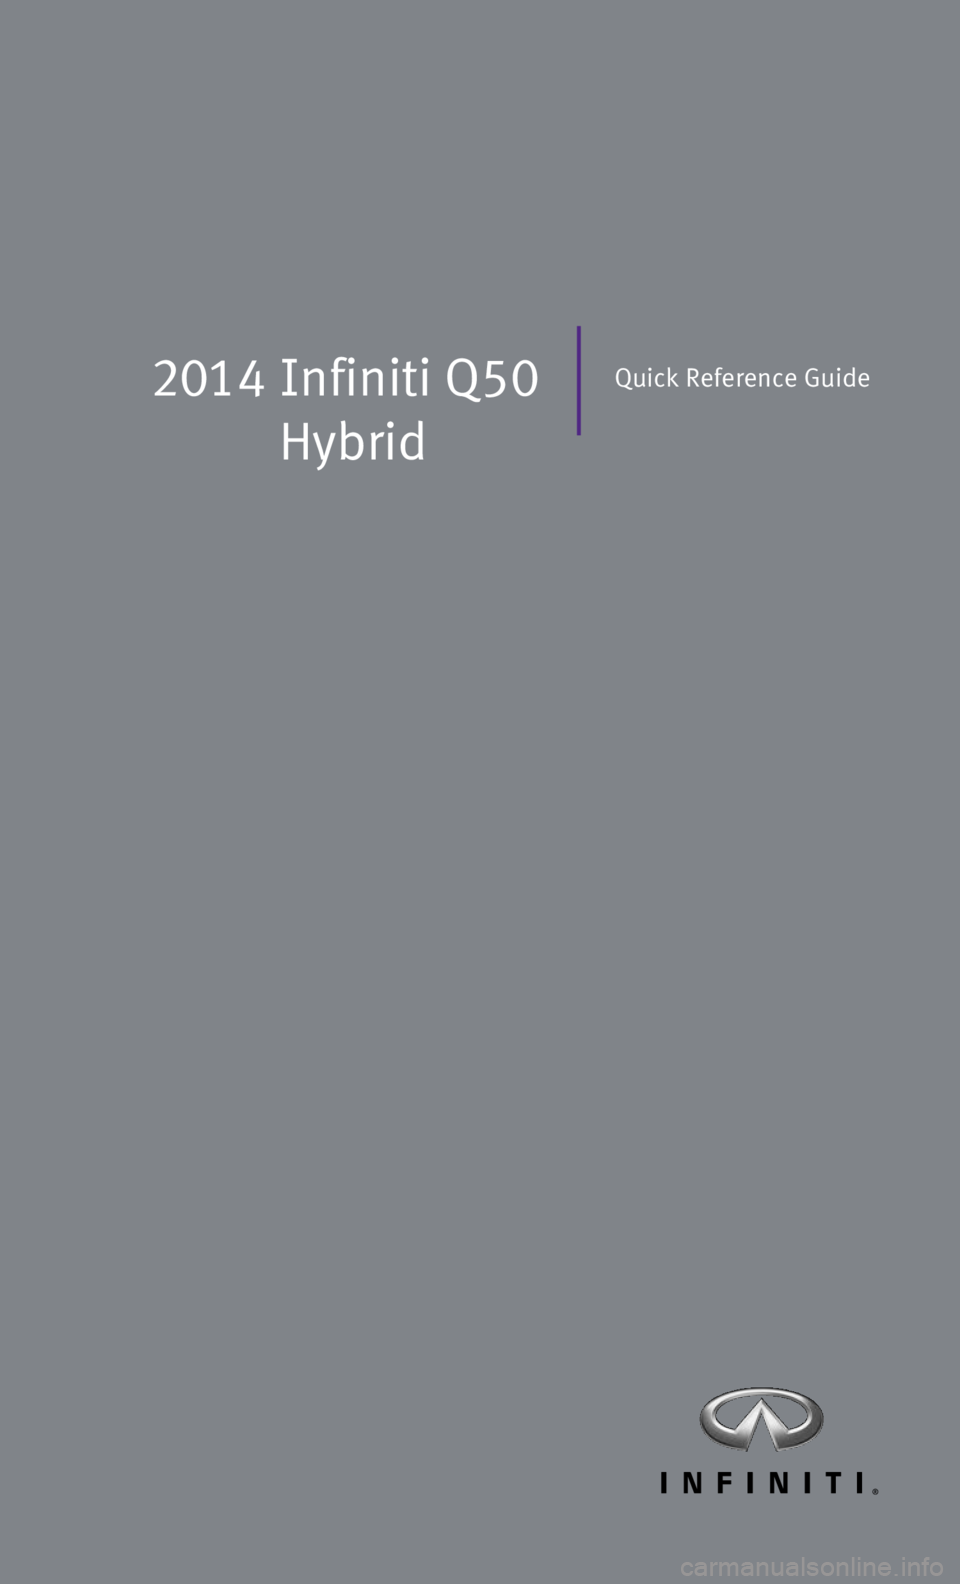 INFINITI Q50 HYBRID 2014  Quick Reference Guide 2014  Infiniti Q50 
HybridQuick Reference Guide 